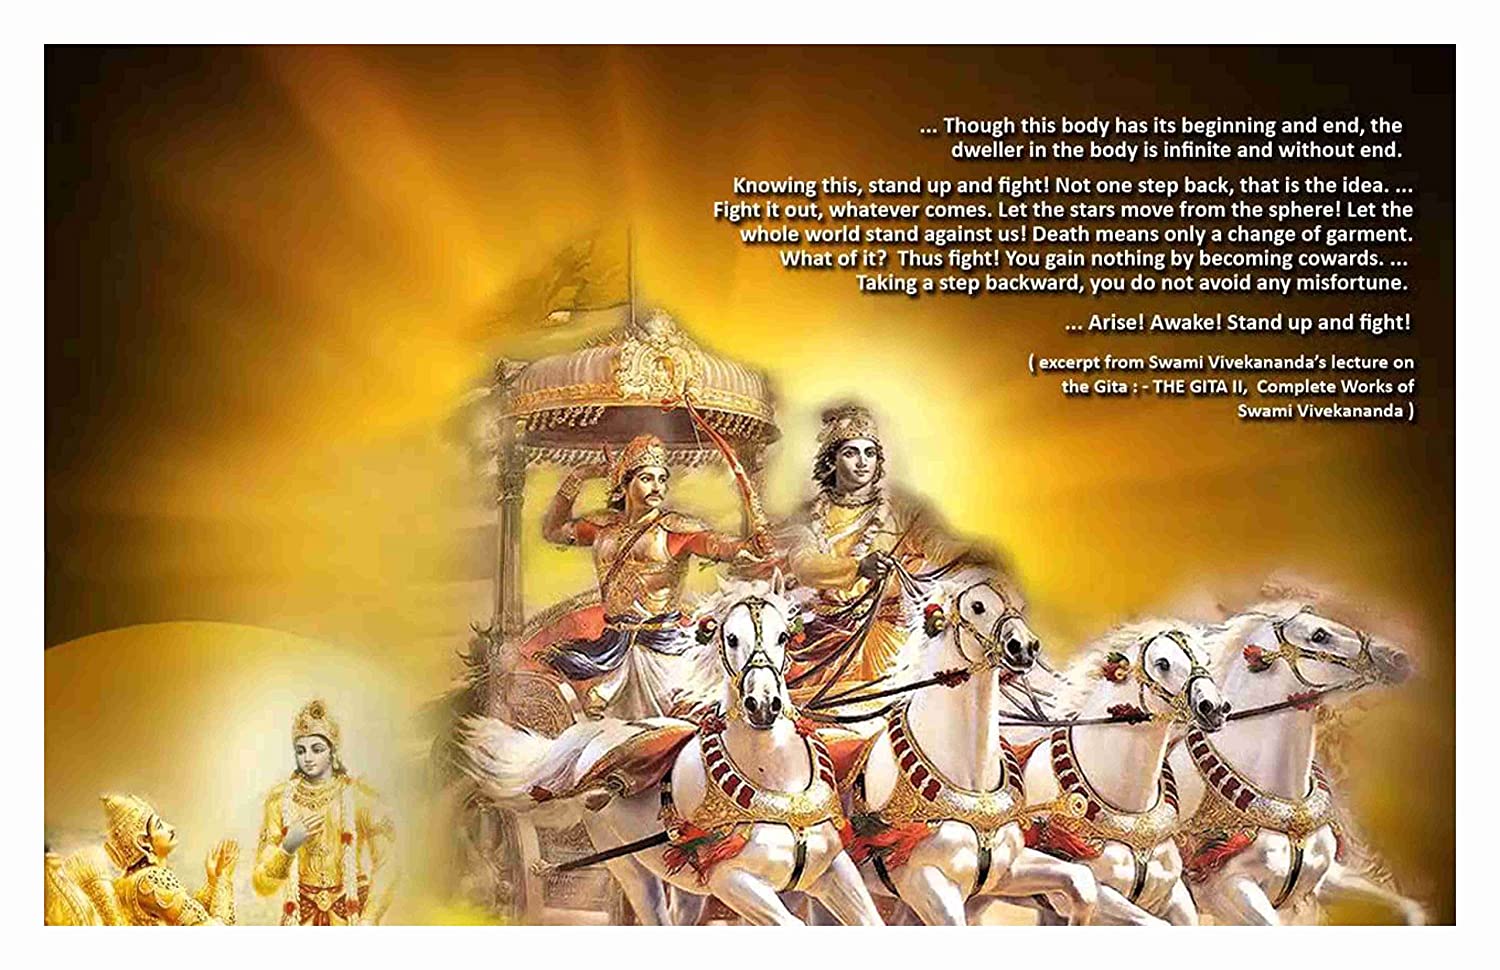 HK Prints Lord Shree Krishna With Arjun Mahabharat Poster For Room (Paper, 12x18 Inch, Multicolour): Amazon.in: Home & Kitchen